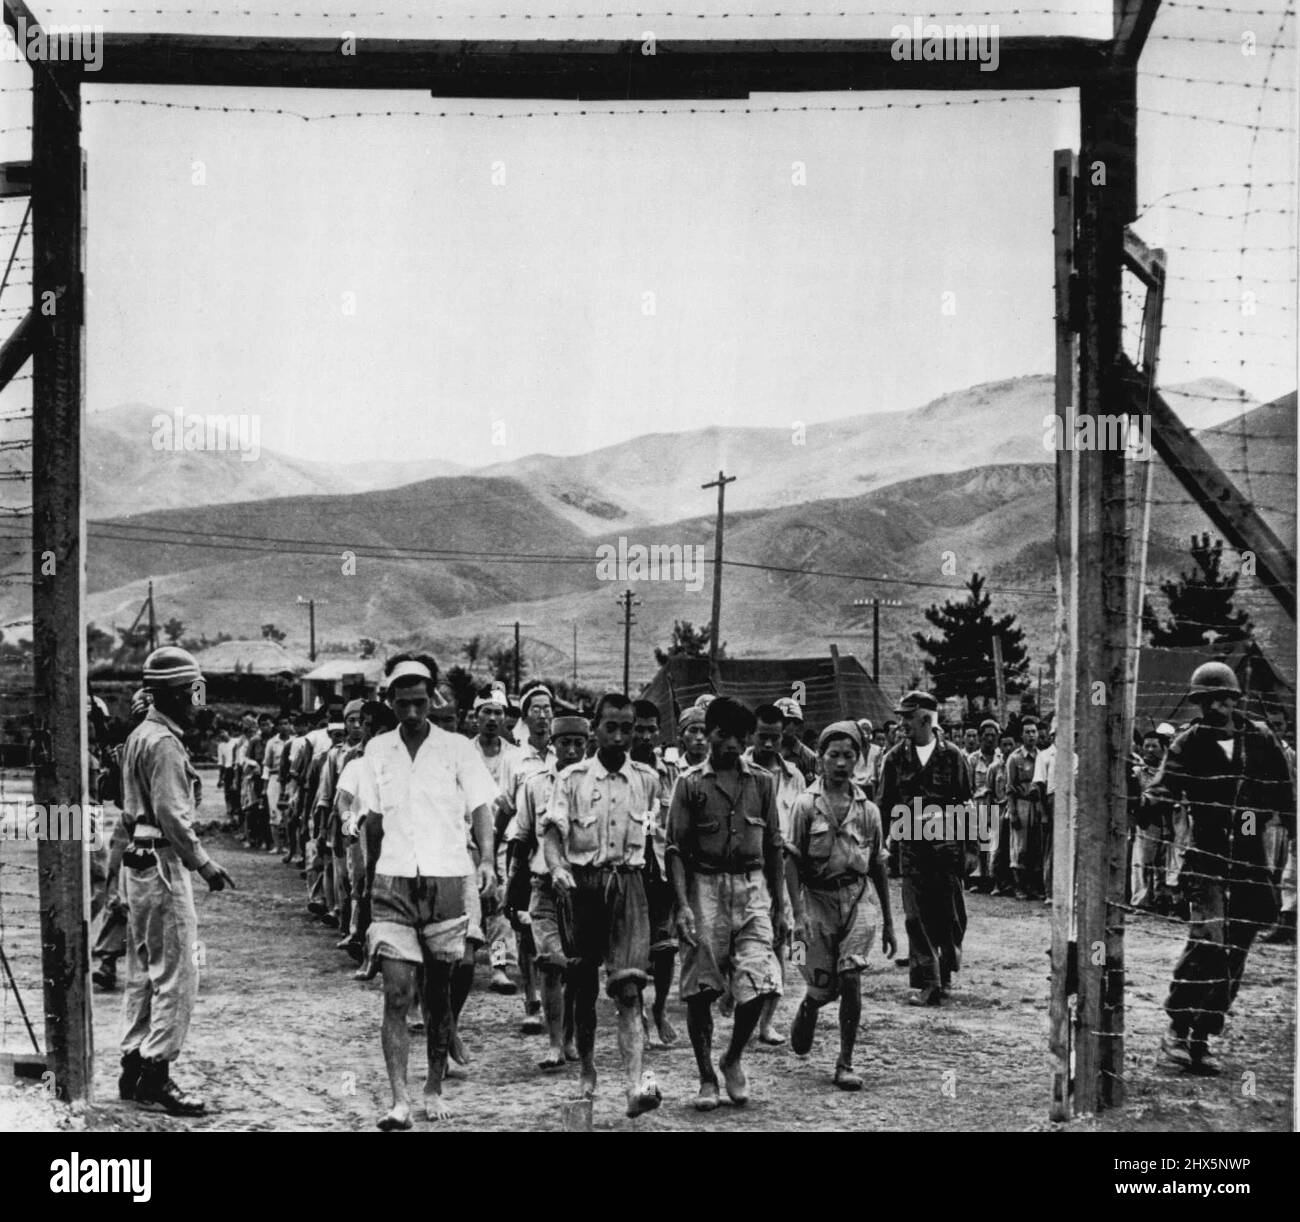 Caged For The Duration -- North Korean prisoners are marched through barbed wire gate into prisoner of war enclosure somewhere in Korea. Major John B. Hoar Jr, (second from right, MP band on arm), of Boston, Mass, camp commander looks over his charges. Maj. Hoar did similar duty during World War II. August 27, 1950. (Photo by AP Wirephoto). Stock Photo